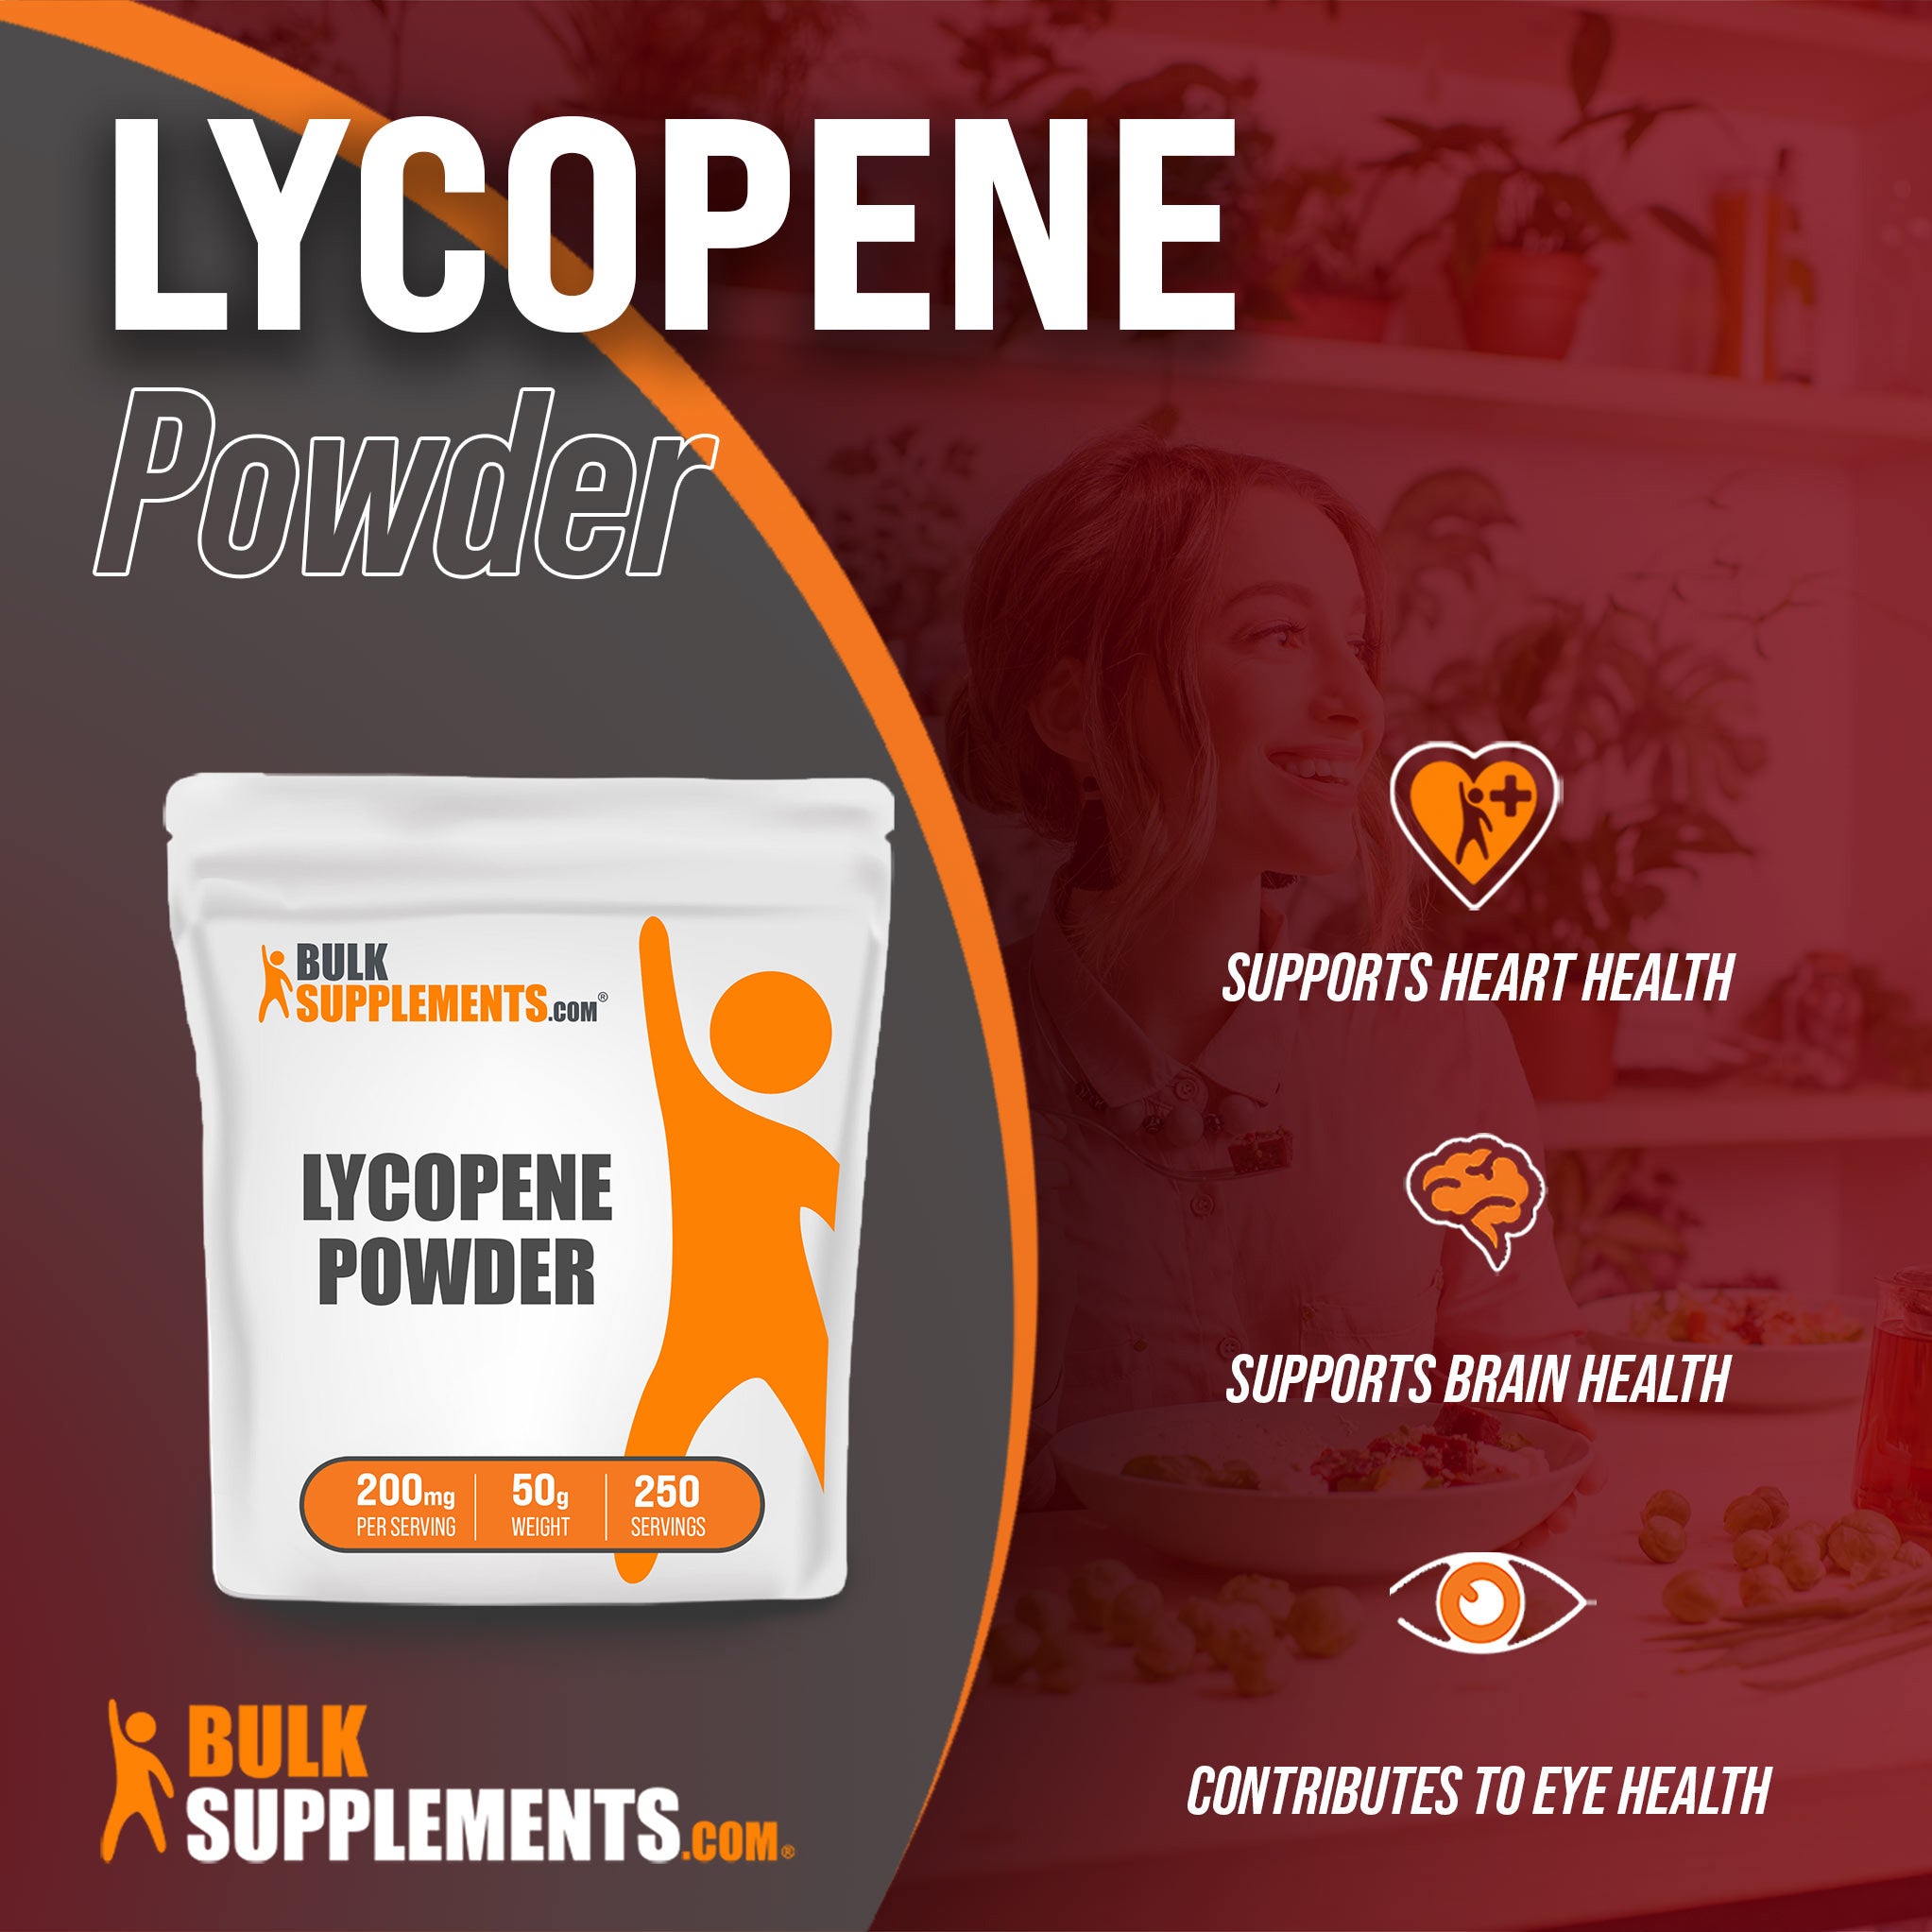 Benefits of Lycopene: supports heart health, supports brain health, contributes to eye health